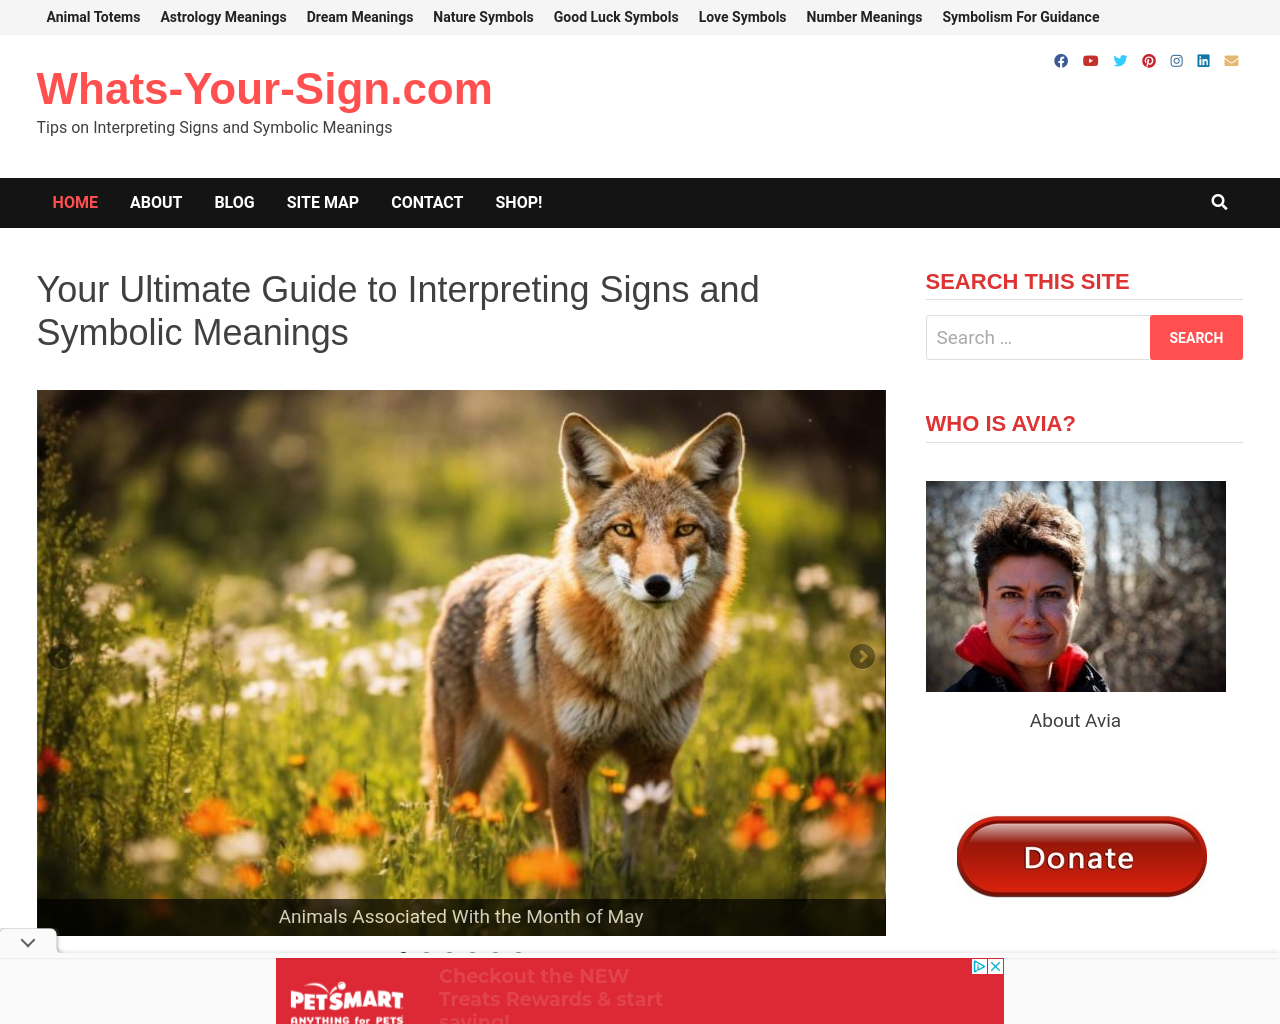 whats-your-sign.com